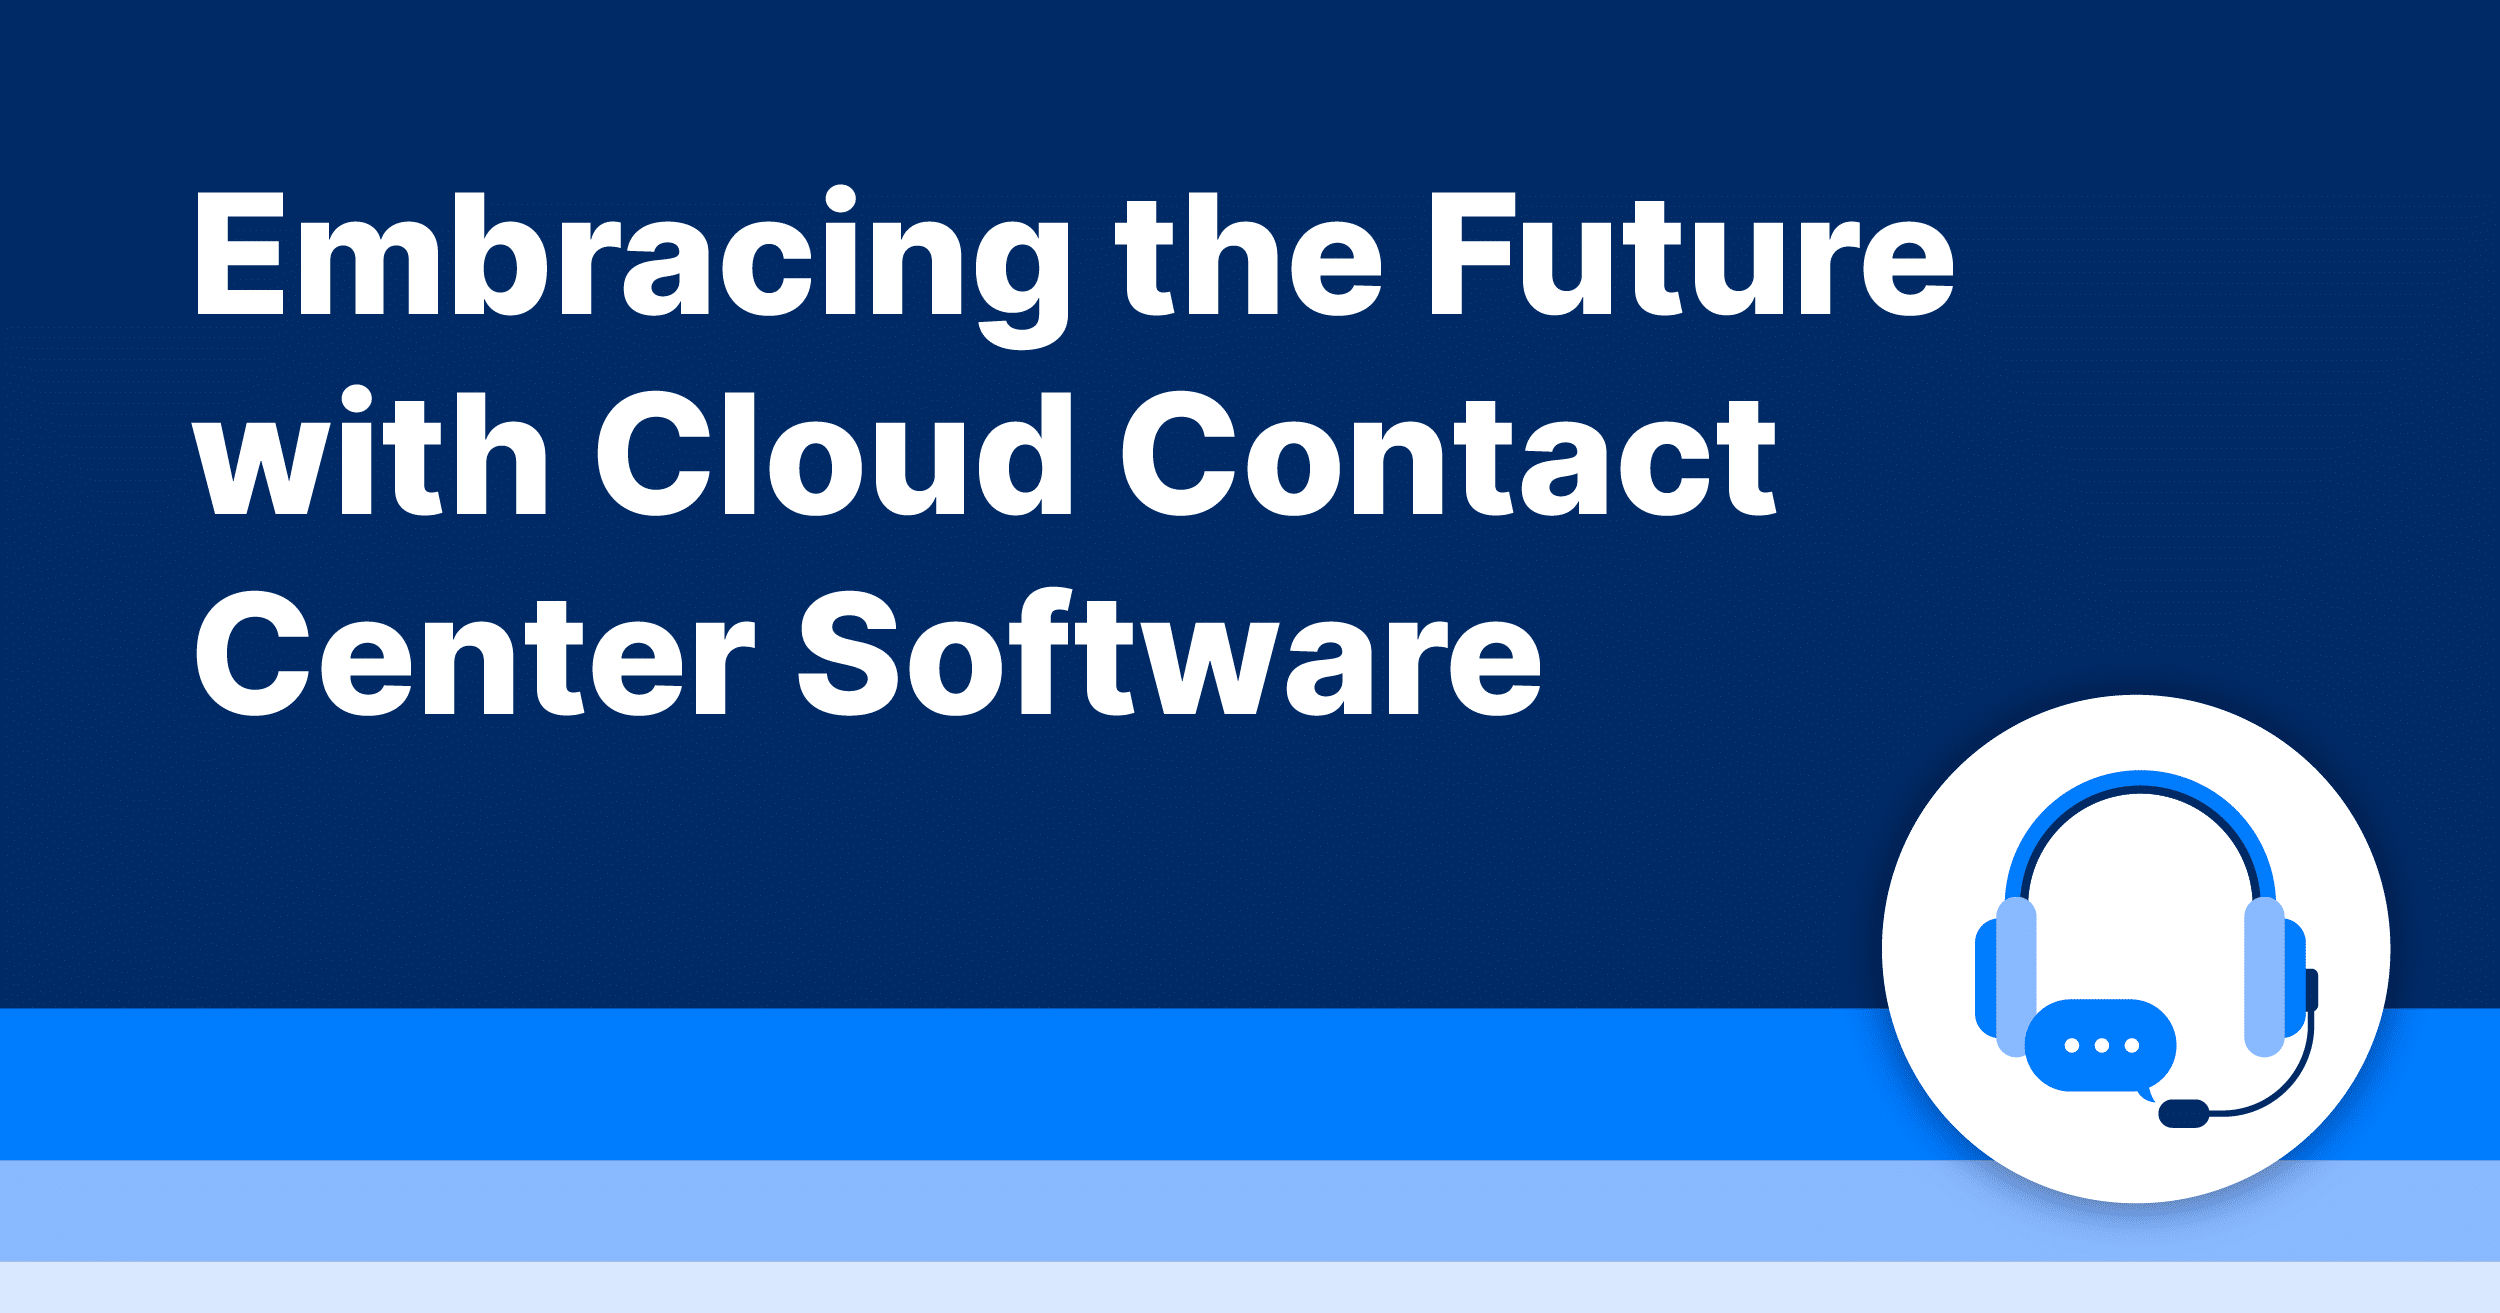 Embracing the Future with Cloud Contact Center Software